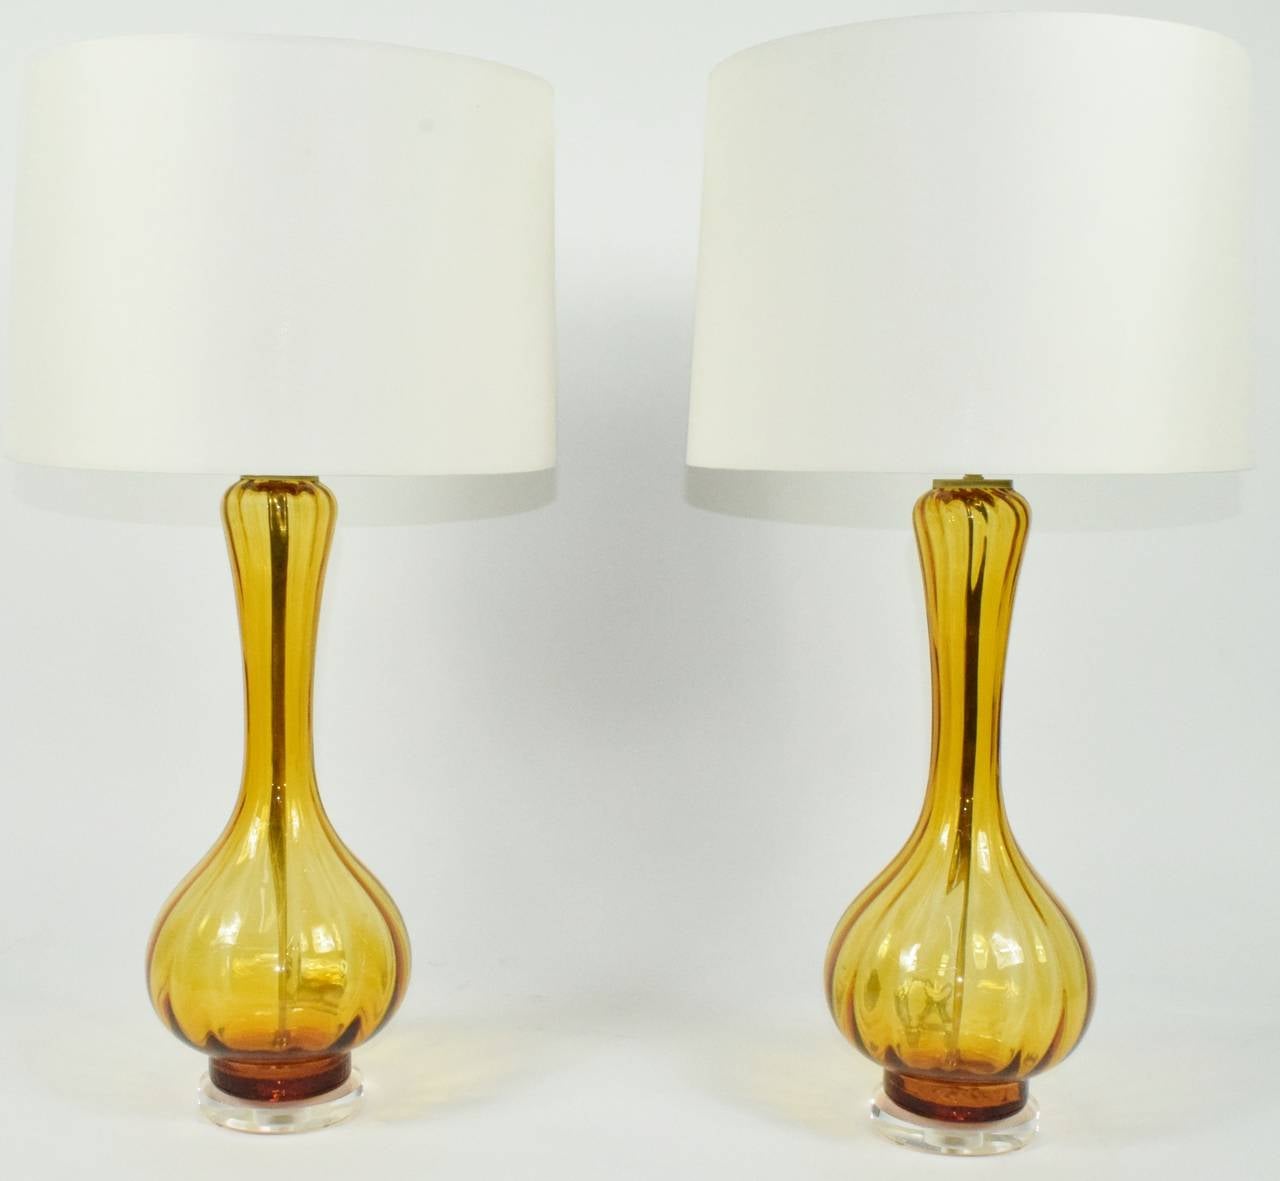 A beautiful pair of Empoli Italian optic glass lamps in a vibrant orange/gold. The lamps are a teardrop form with vertical optic stripes and sit on a lucite base. They have been completely rewired with new brass fittings. The socket can utilize a